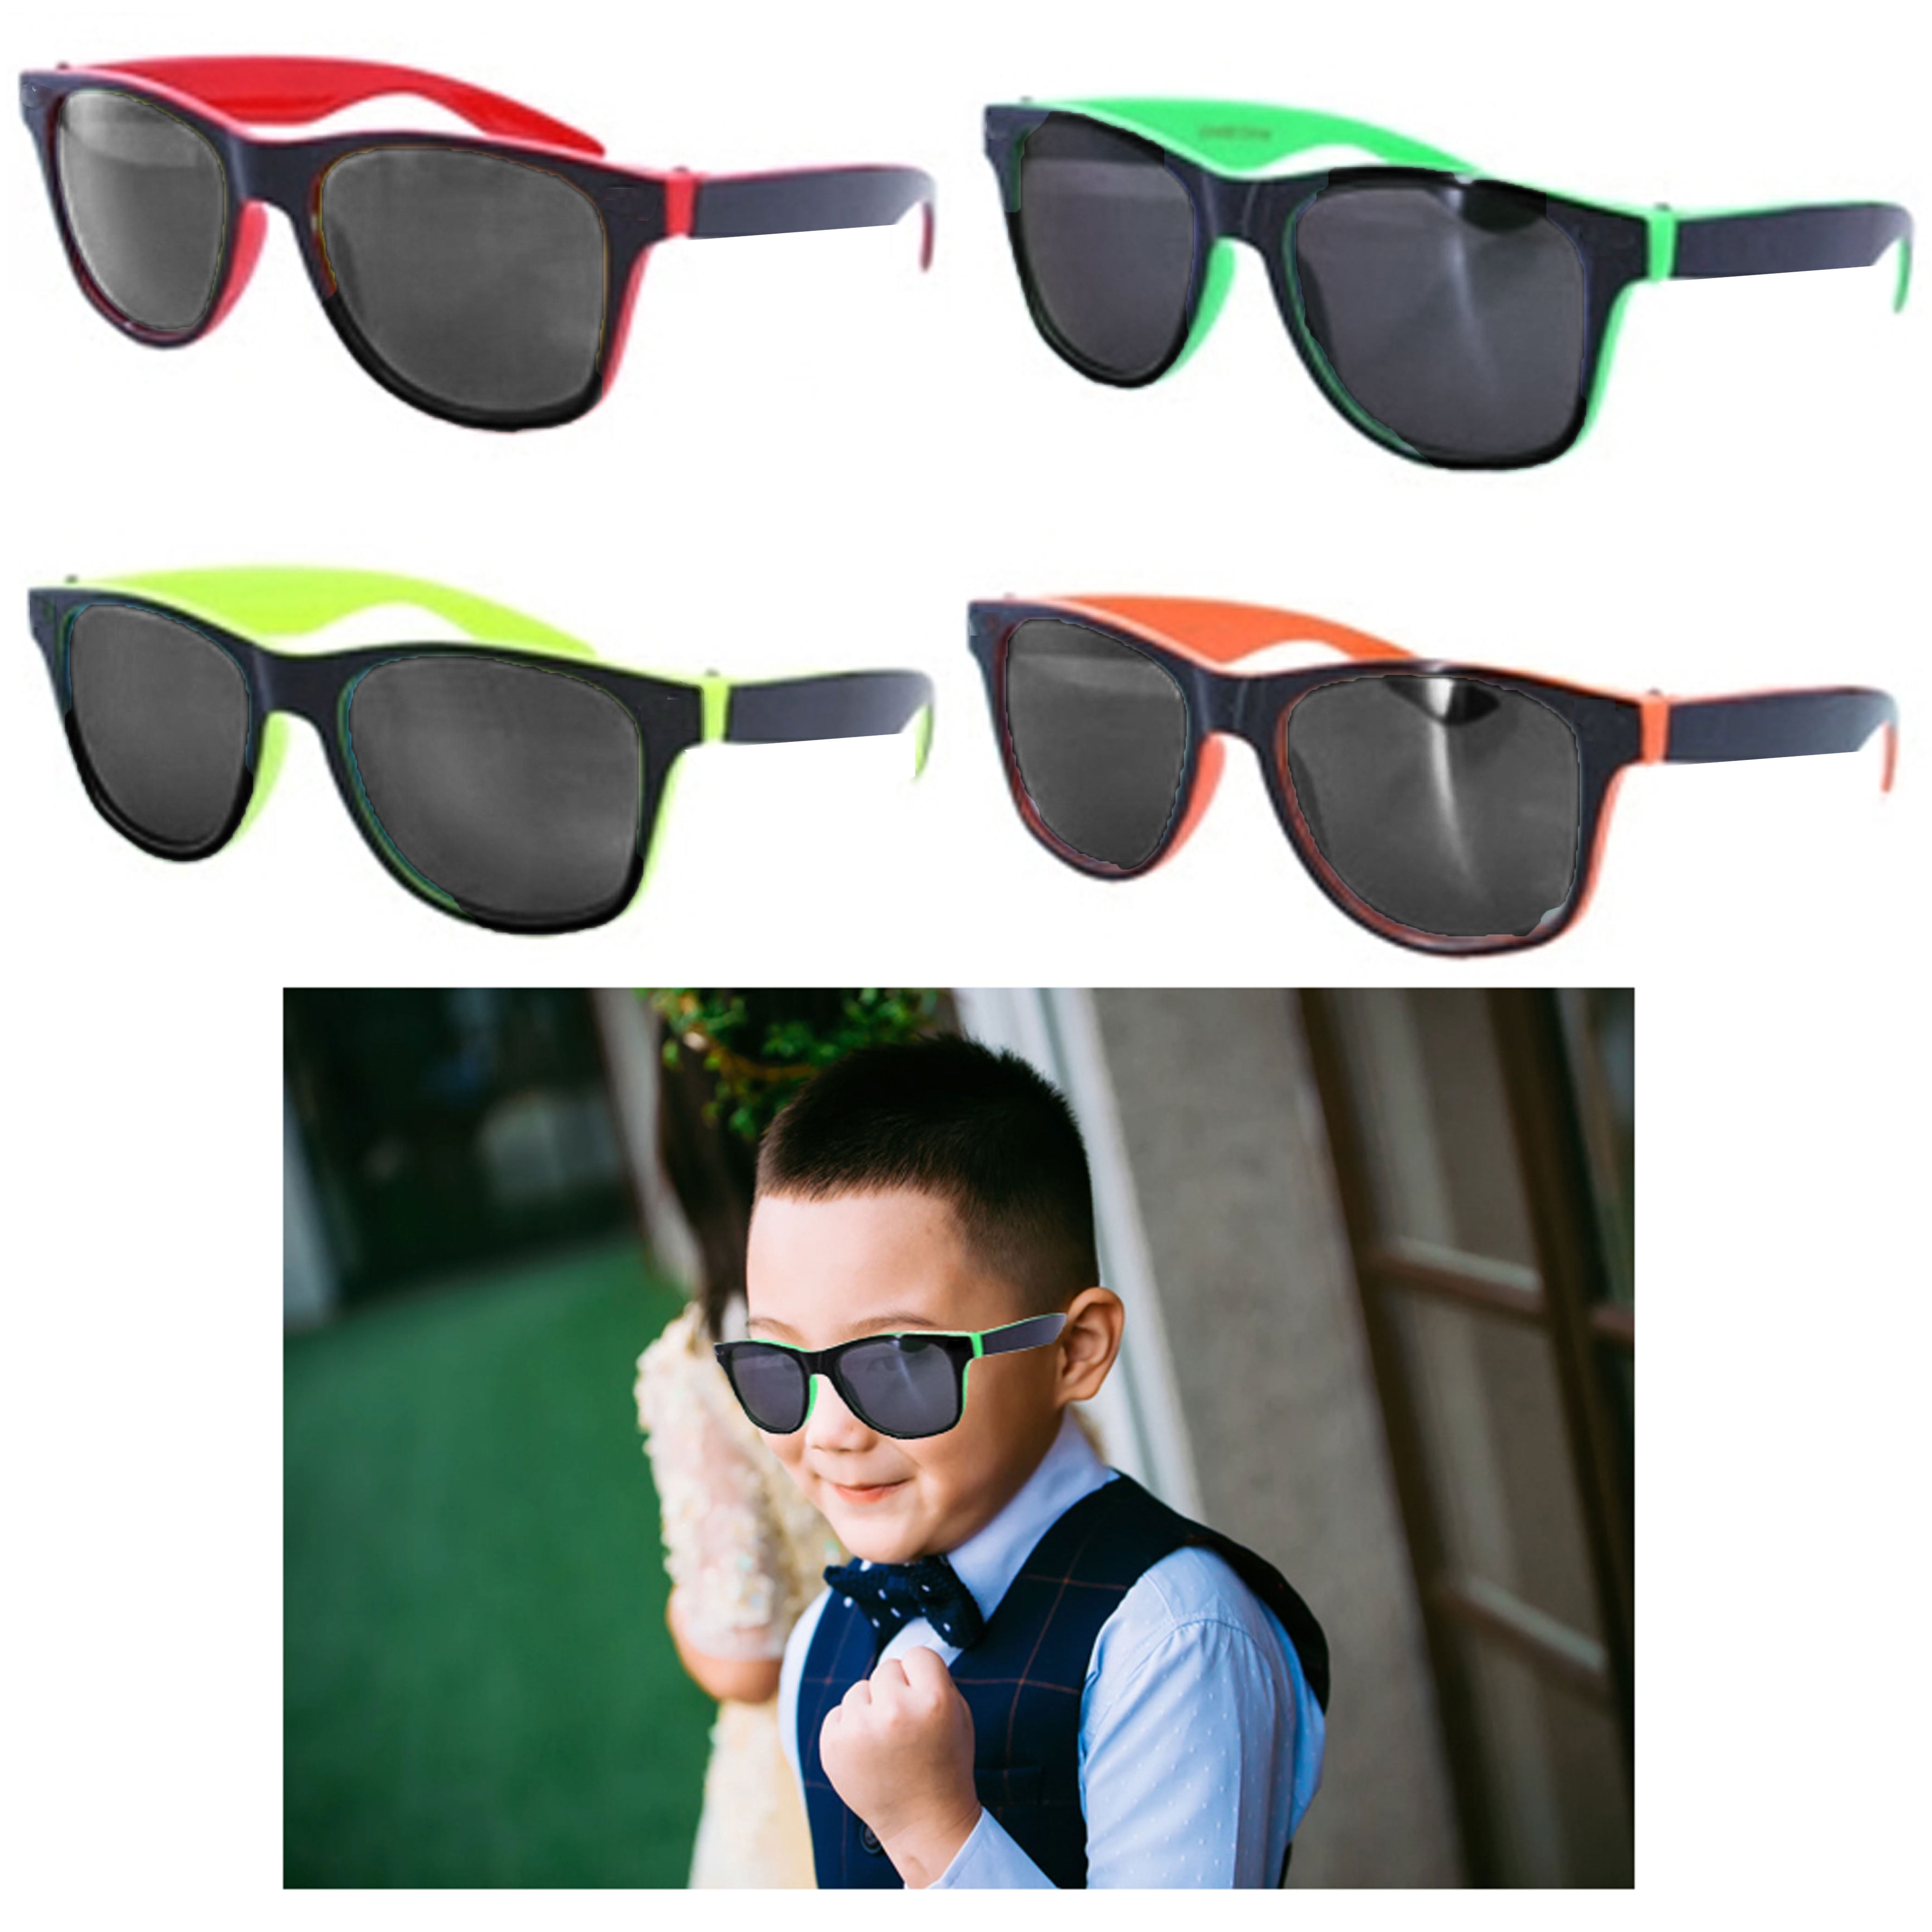 Youth Horned Rim Sunglasses Solid Color Frames with Temple Accents! 